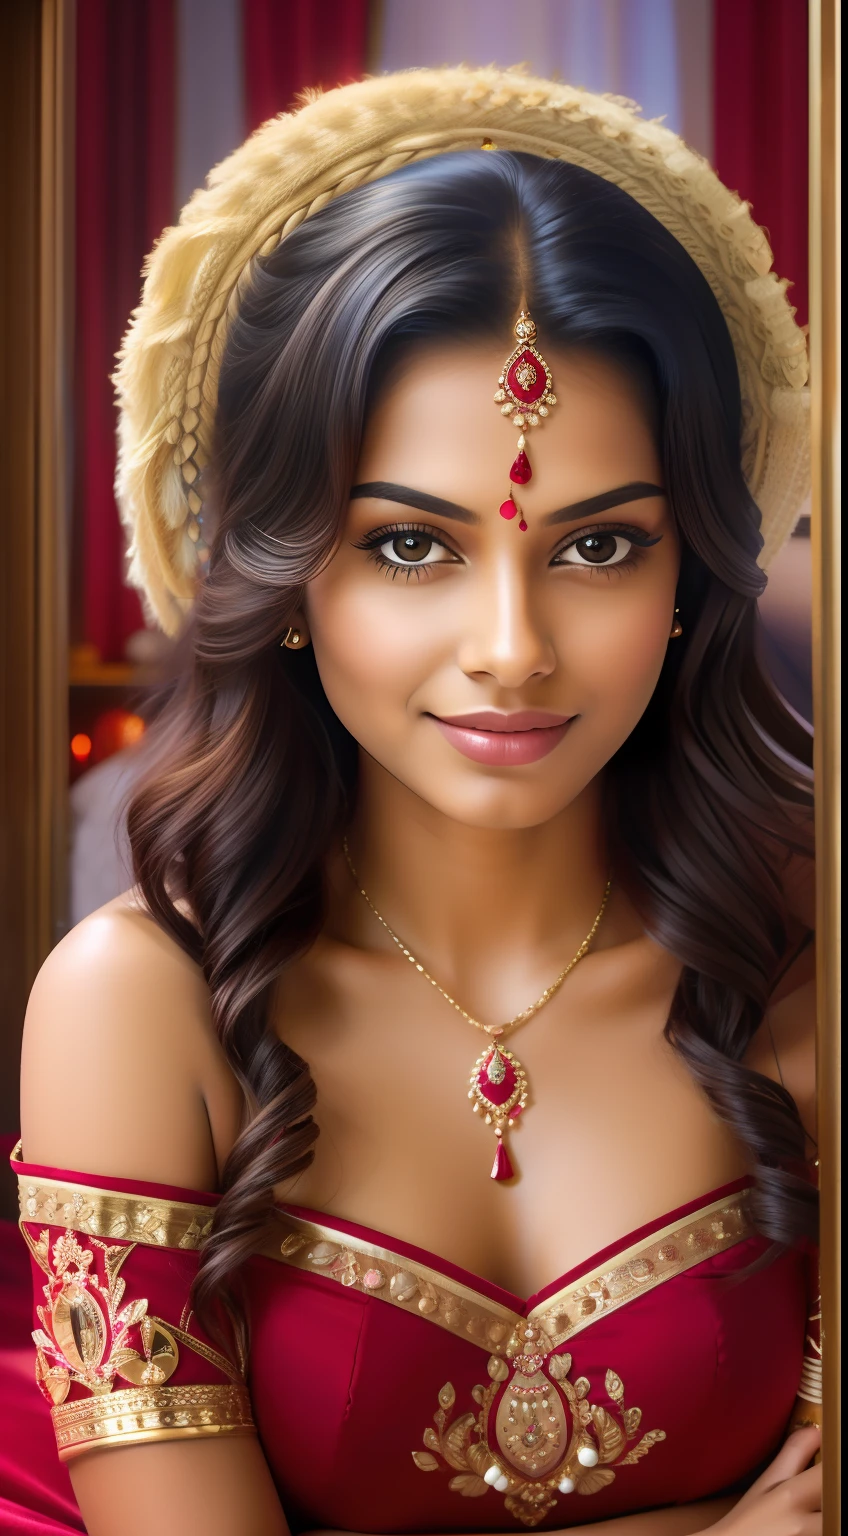 "Portrait of   actress Indian princess in a cozy and intimate bedroom setting."